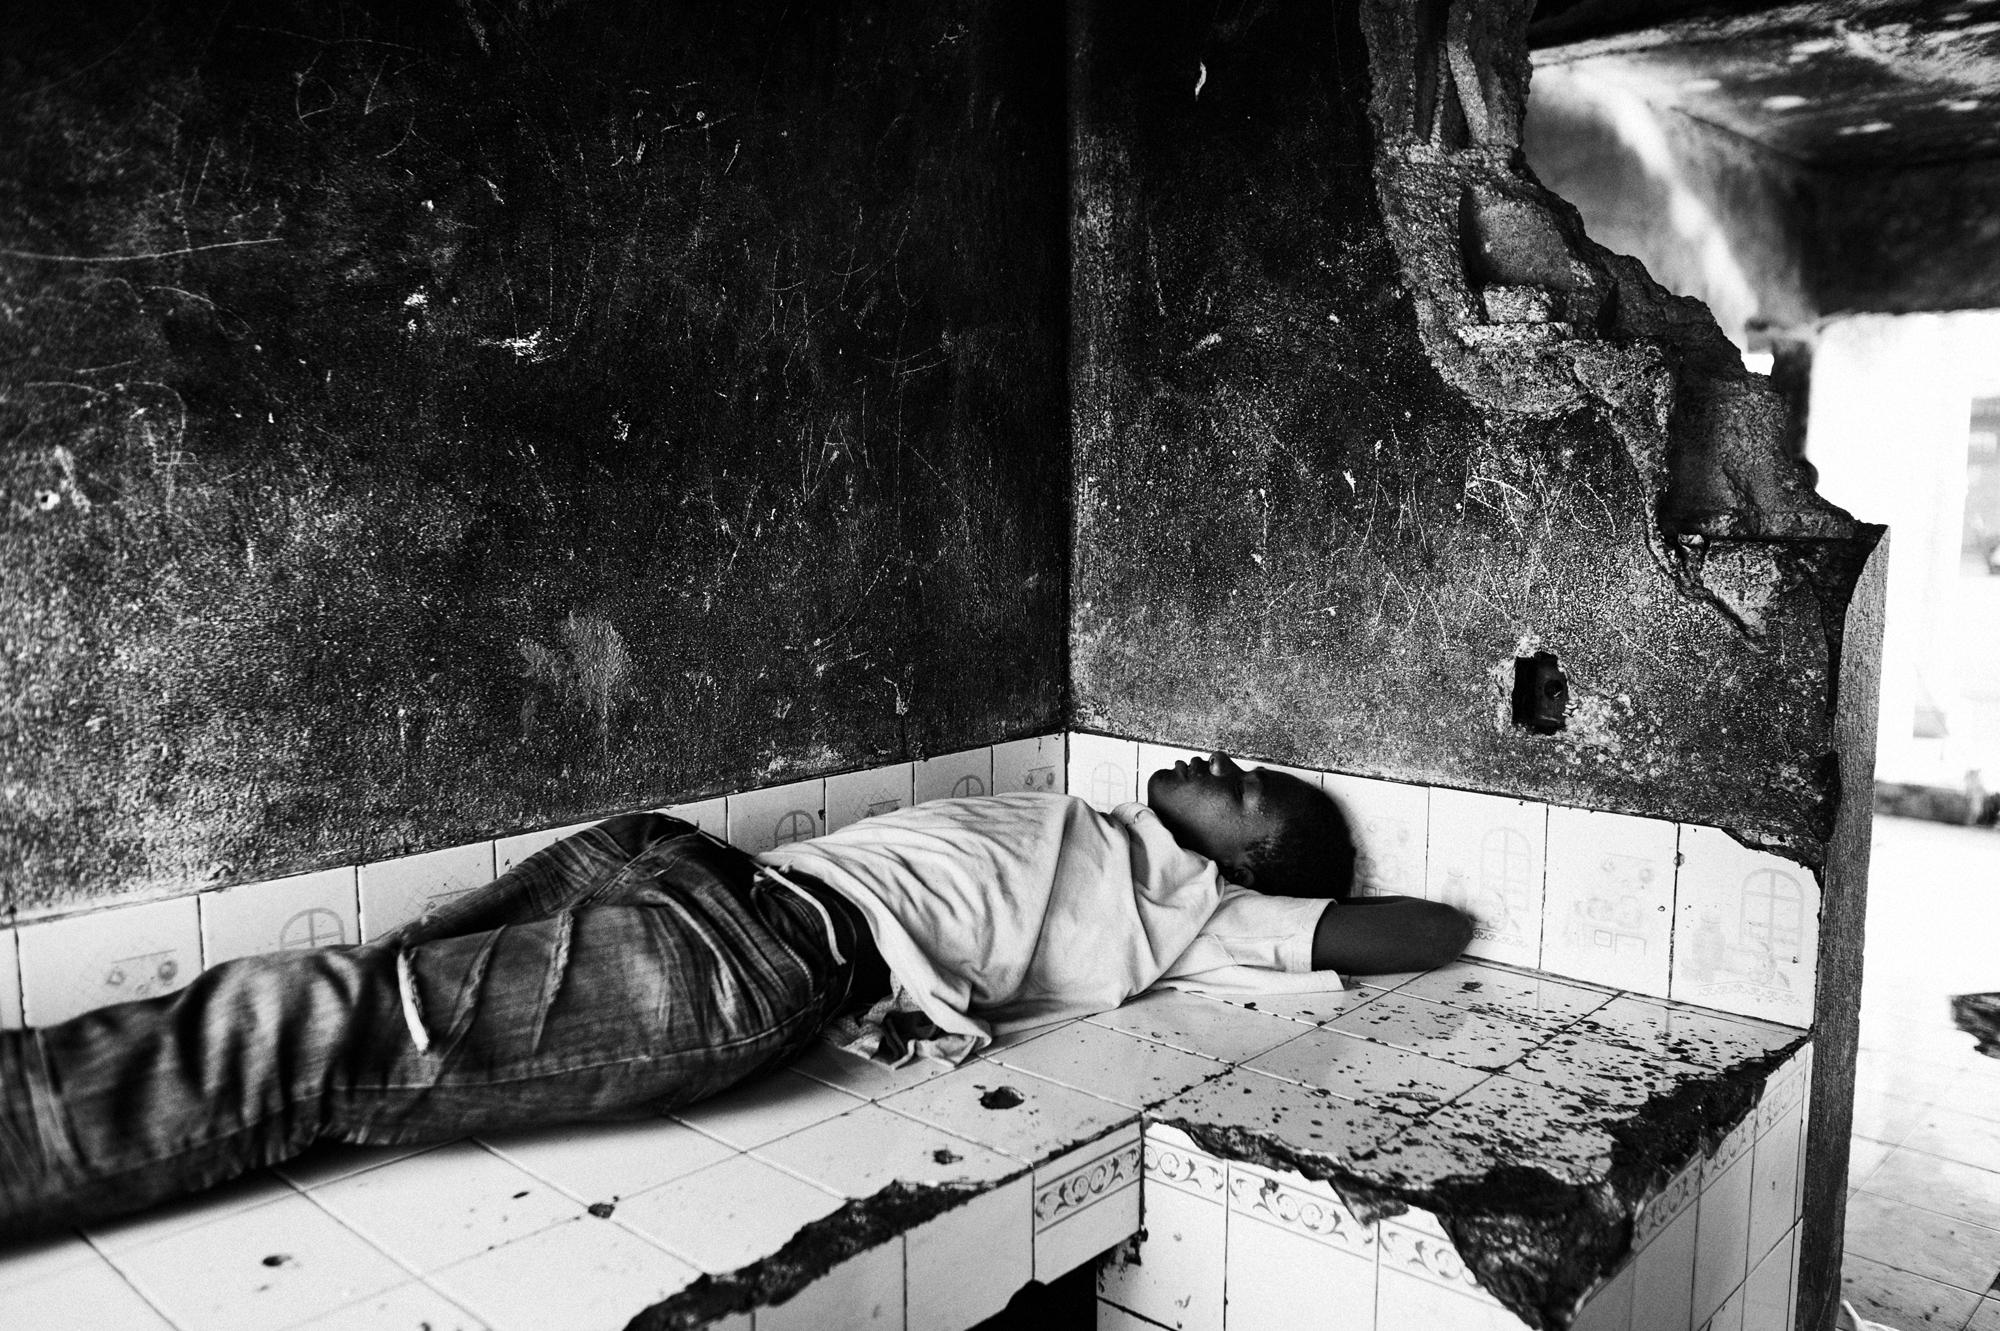 Private hell - Port au Prince.June 2010.A young man sleeping in CitÃ©...